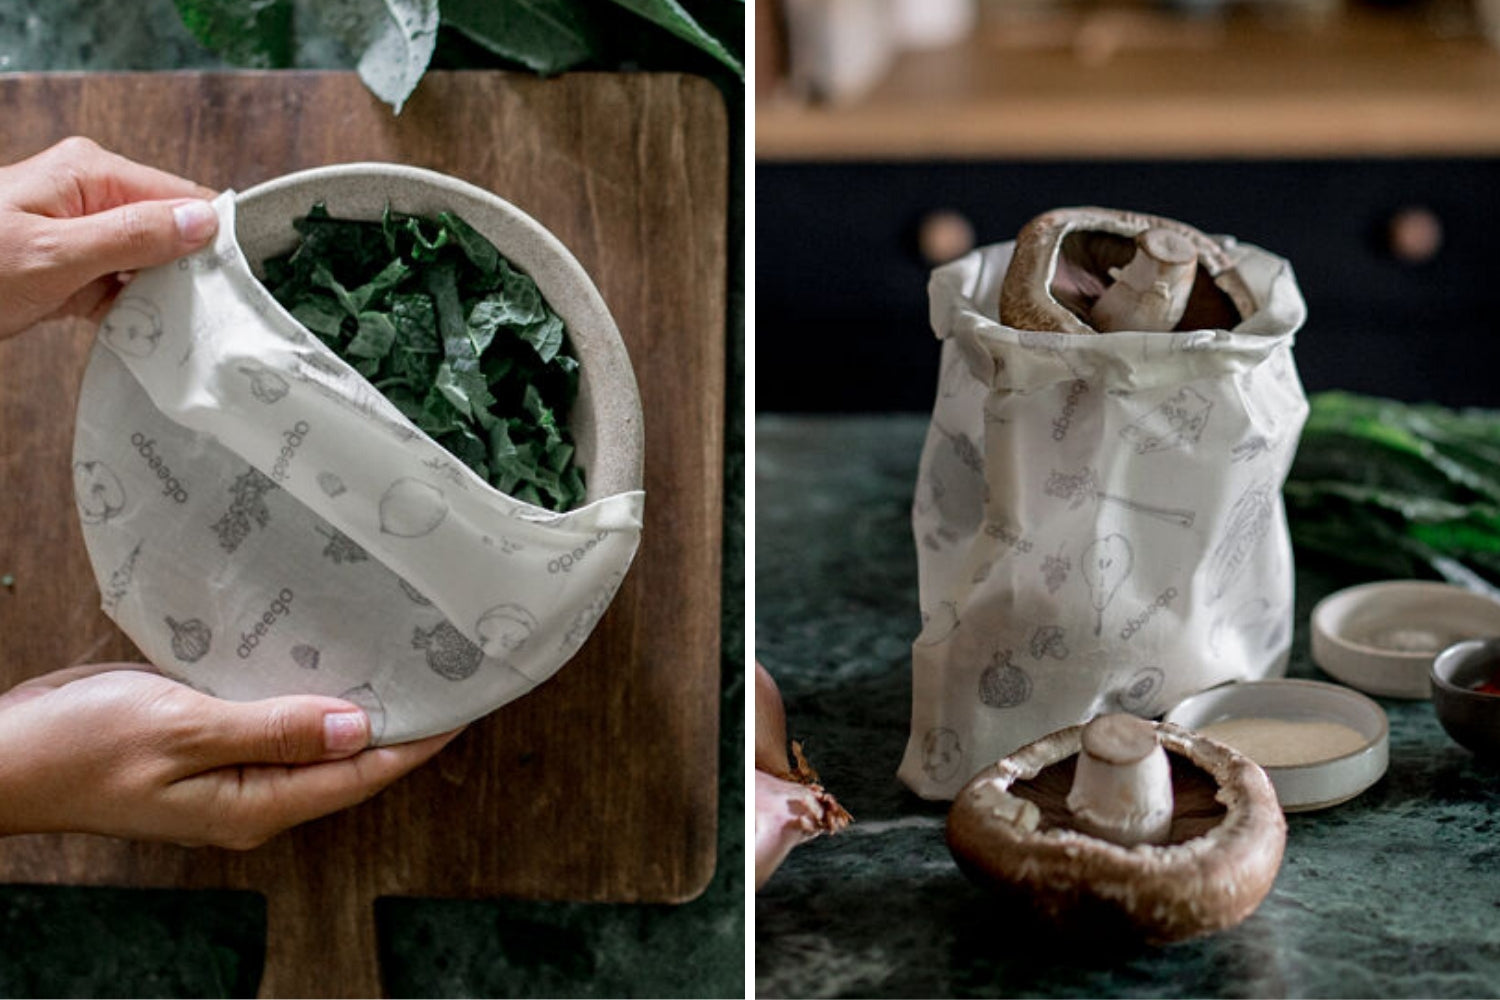 Save leftovers with Abeego Beeswax Wraps | Zero waste bowl covers and plastic free food bags